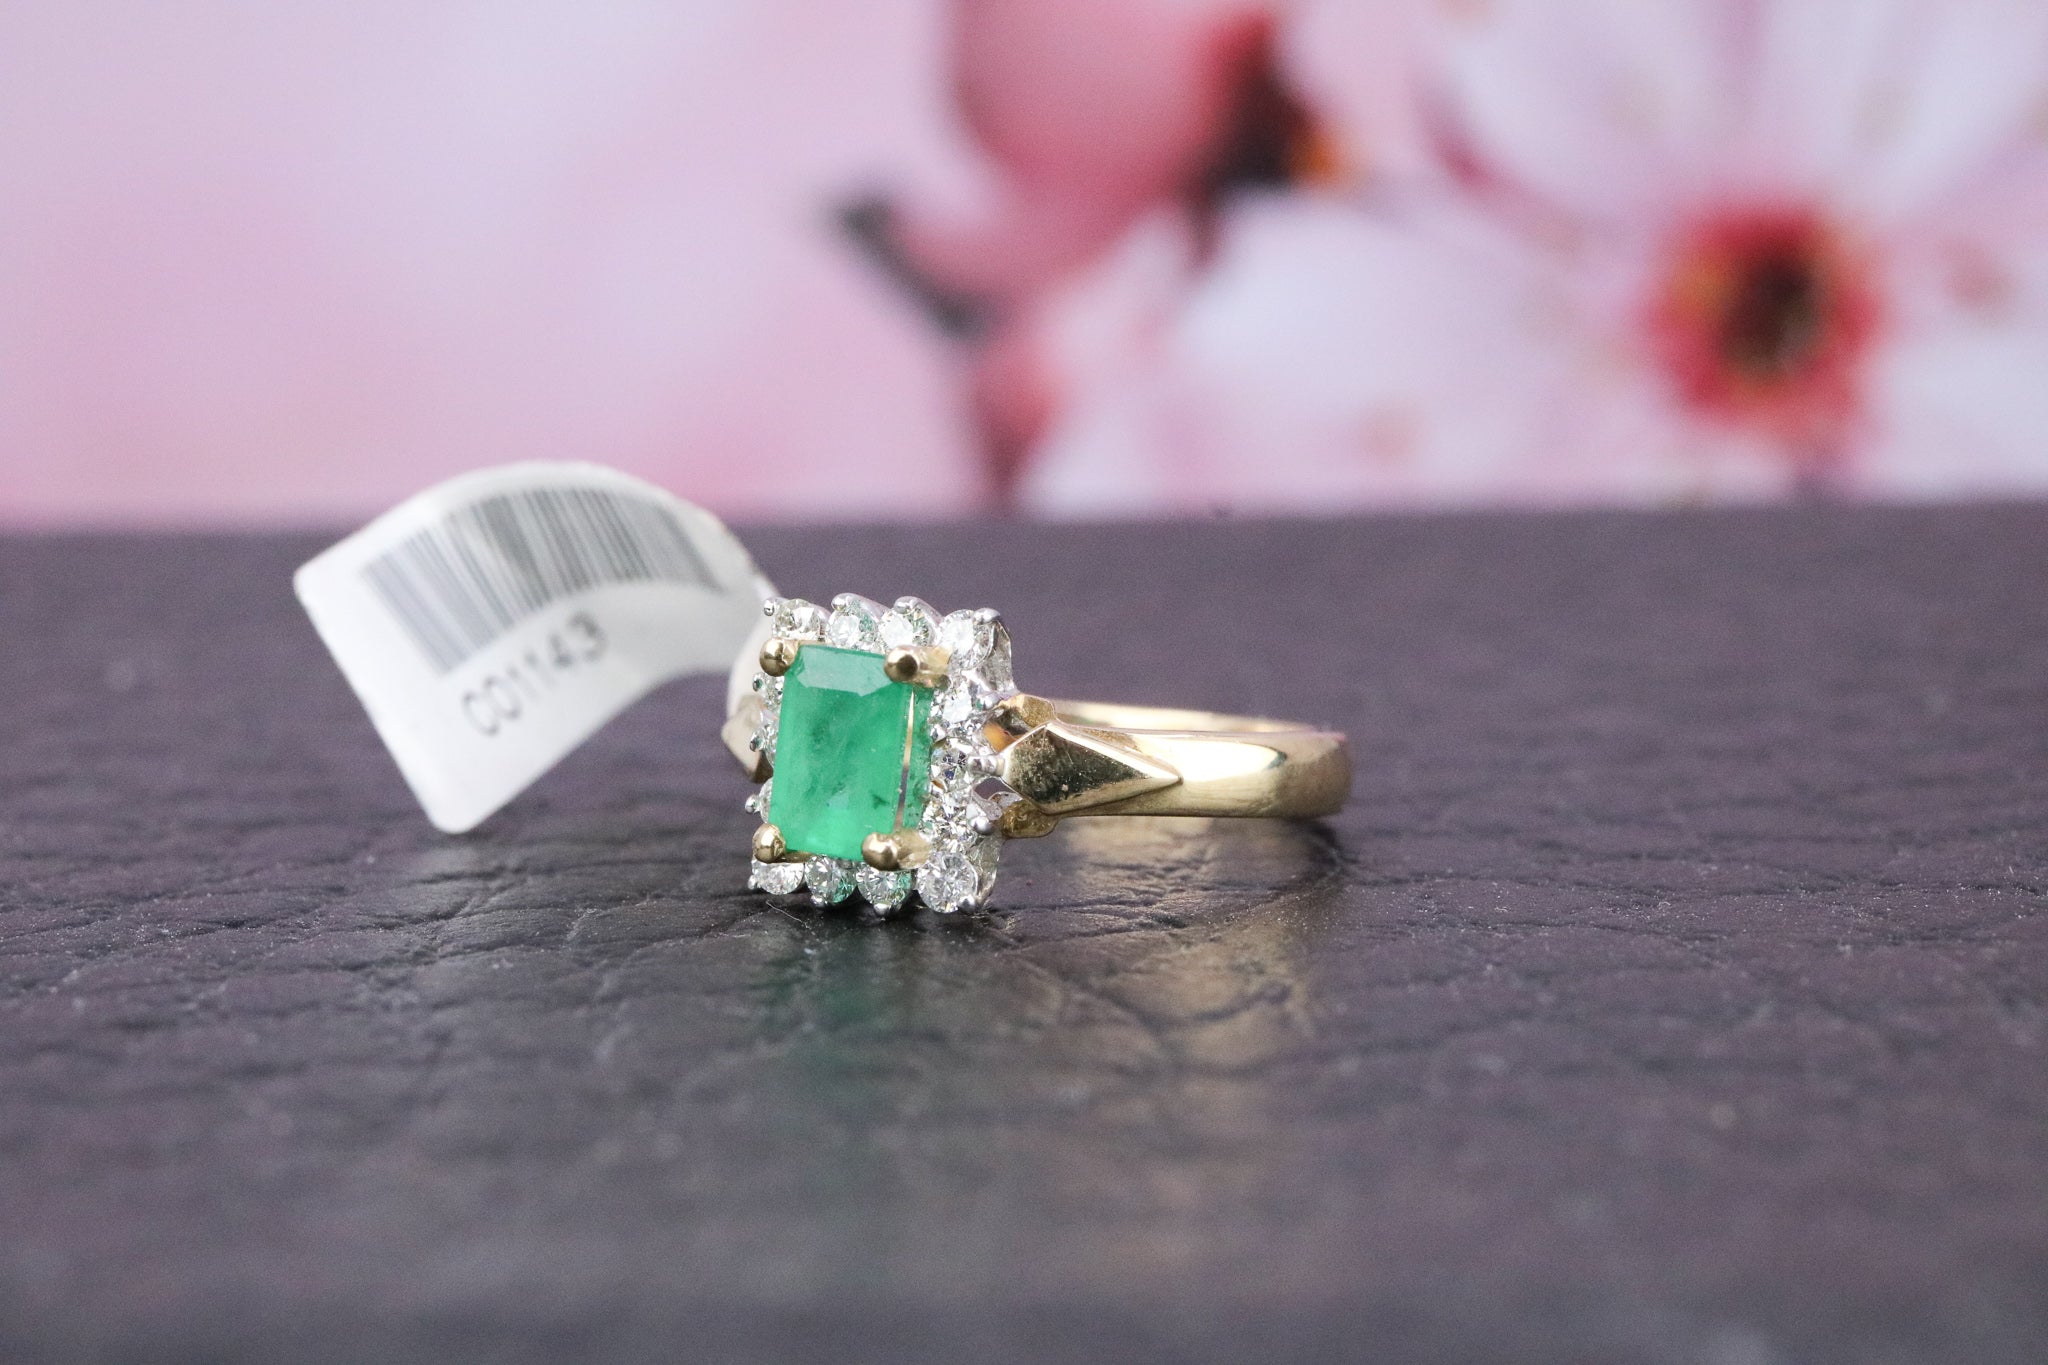 9ct Yellow Gold, Emerald & Diamond Ring - CO1143 - Hallmark Jewellers Formby & The Jewellers Bench Widnes